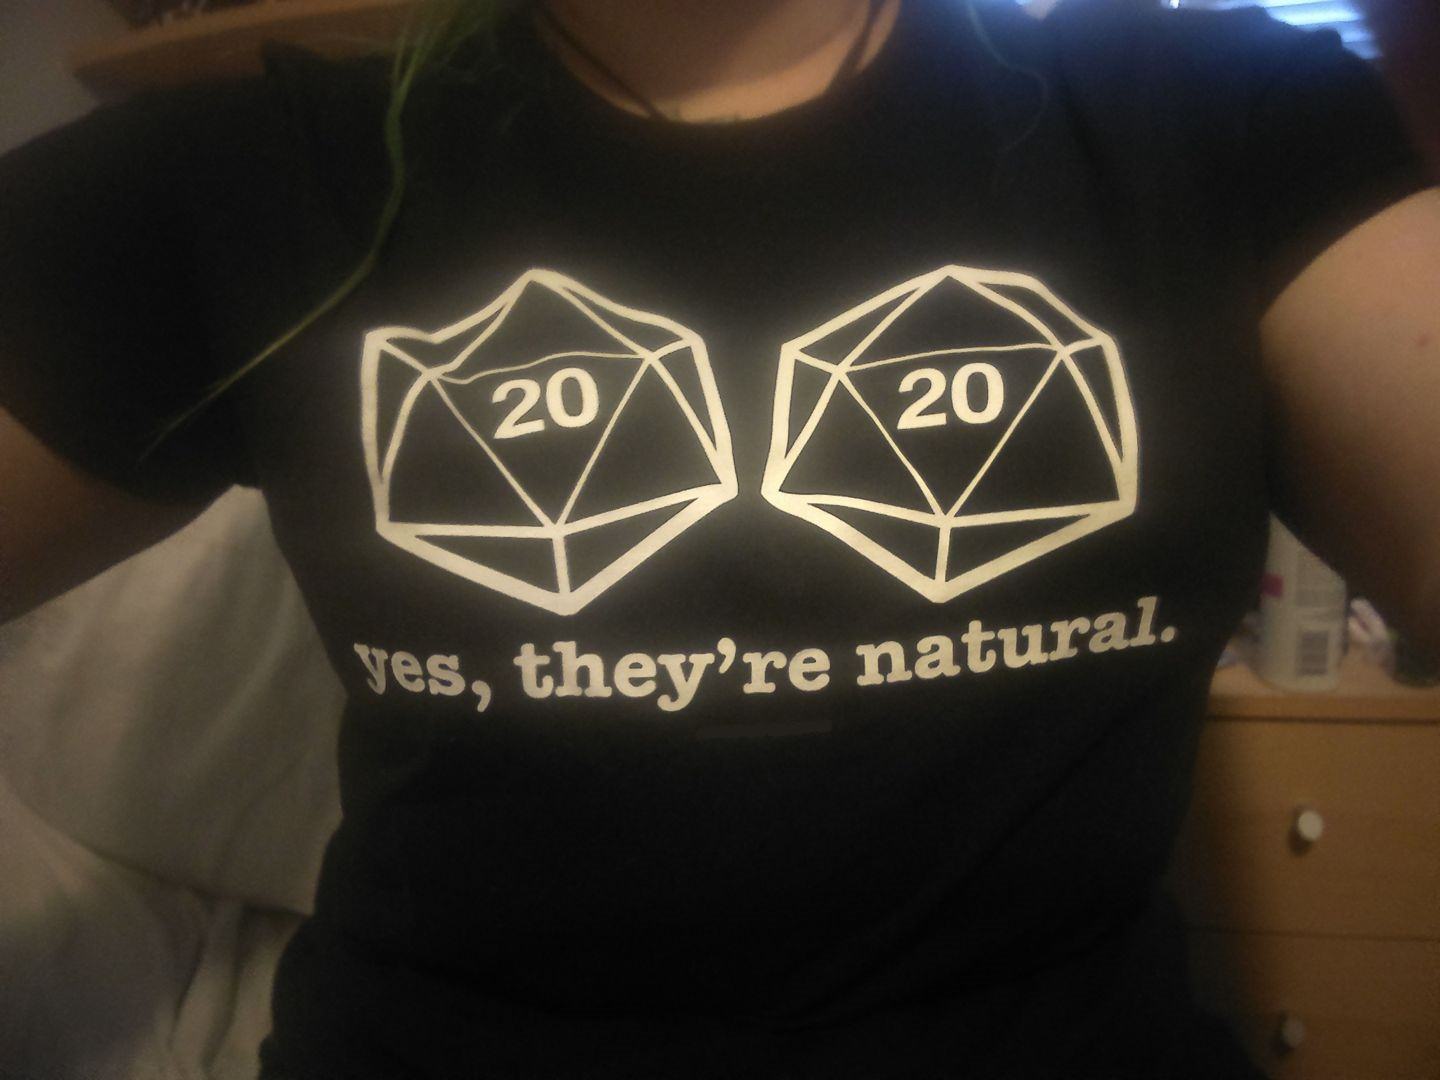 d20 they are naturals - Yes, they're natural.